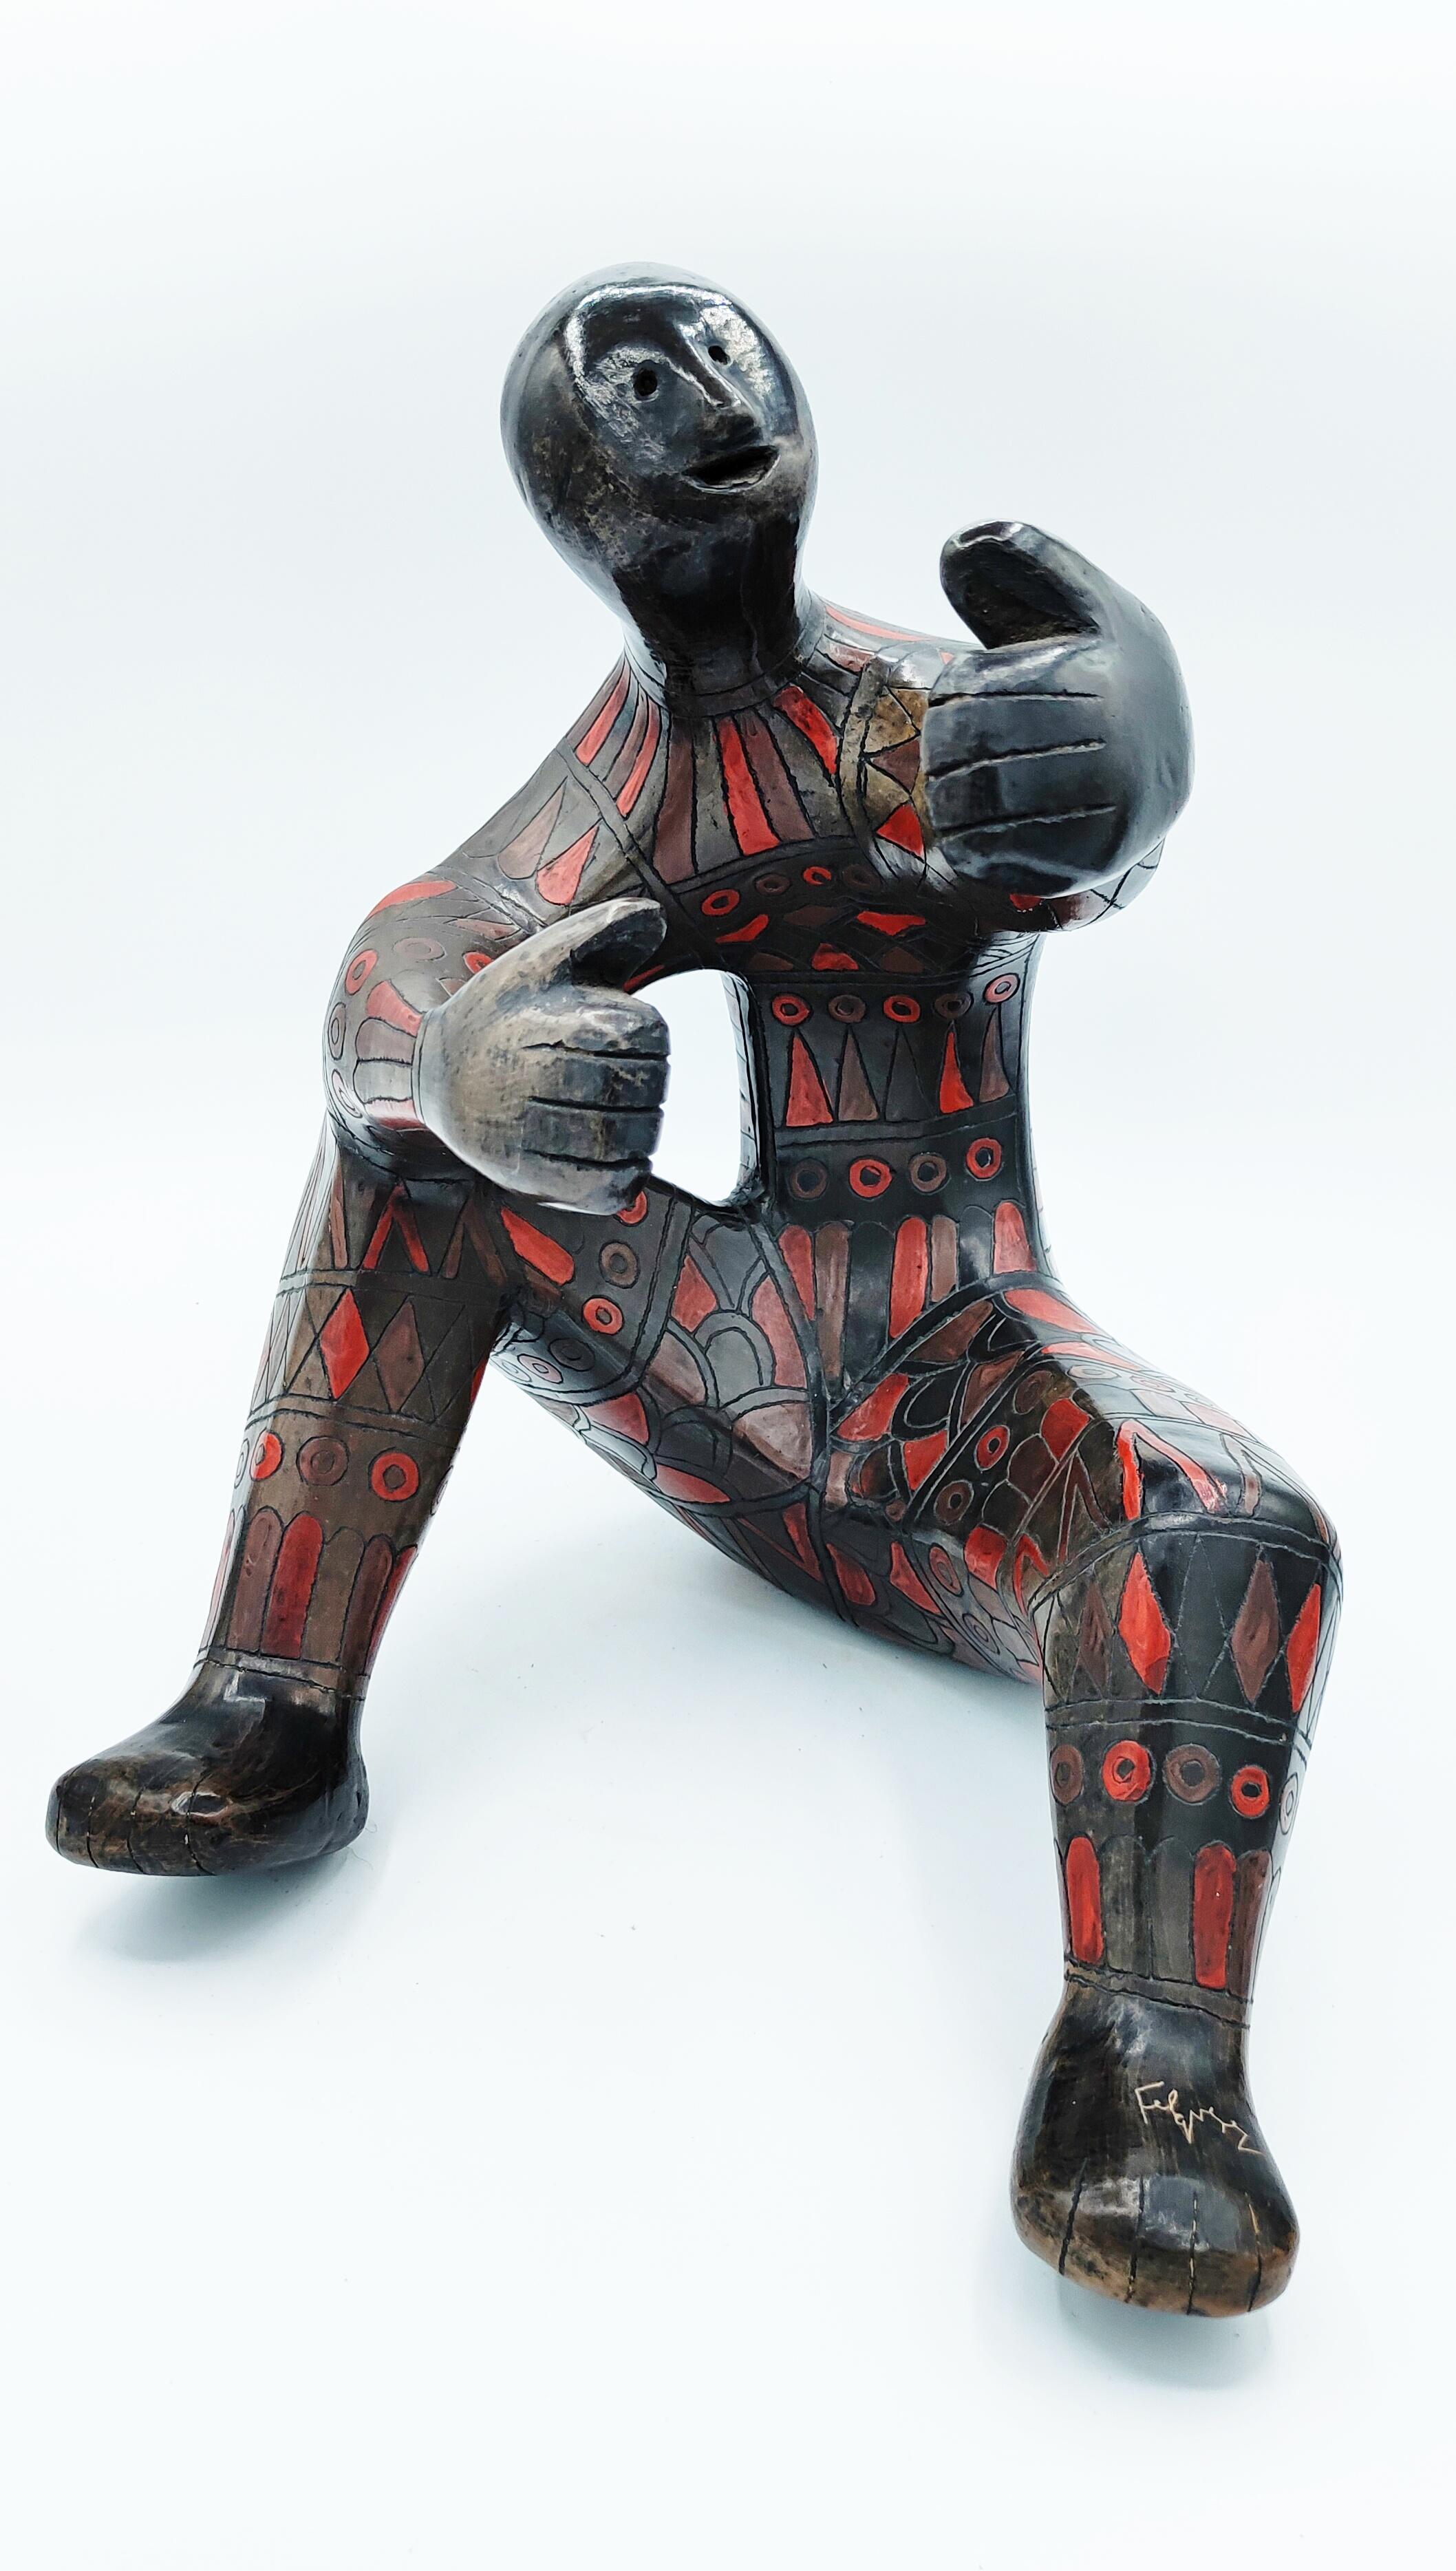 Large ceramic figurine sculpture by Manuel Felguerez signed on the foot, manufactured in 1960s. Incredible work with his color and details.
Very decorative and attractive object.
Manuel Felguérez was born in Valparaíso, Zacatecas in 1929.
He was one